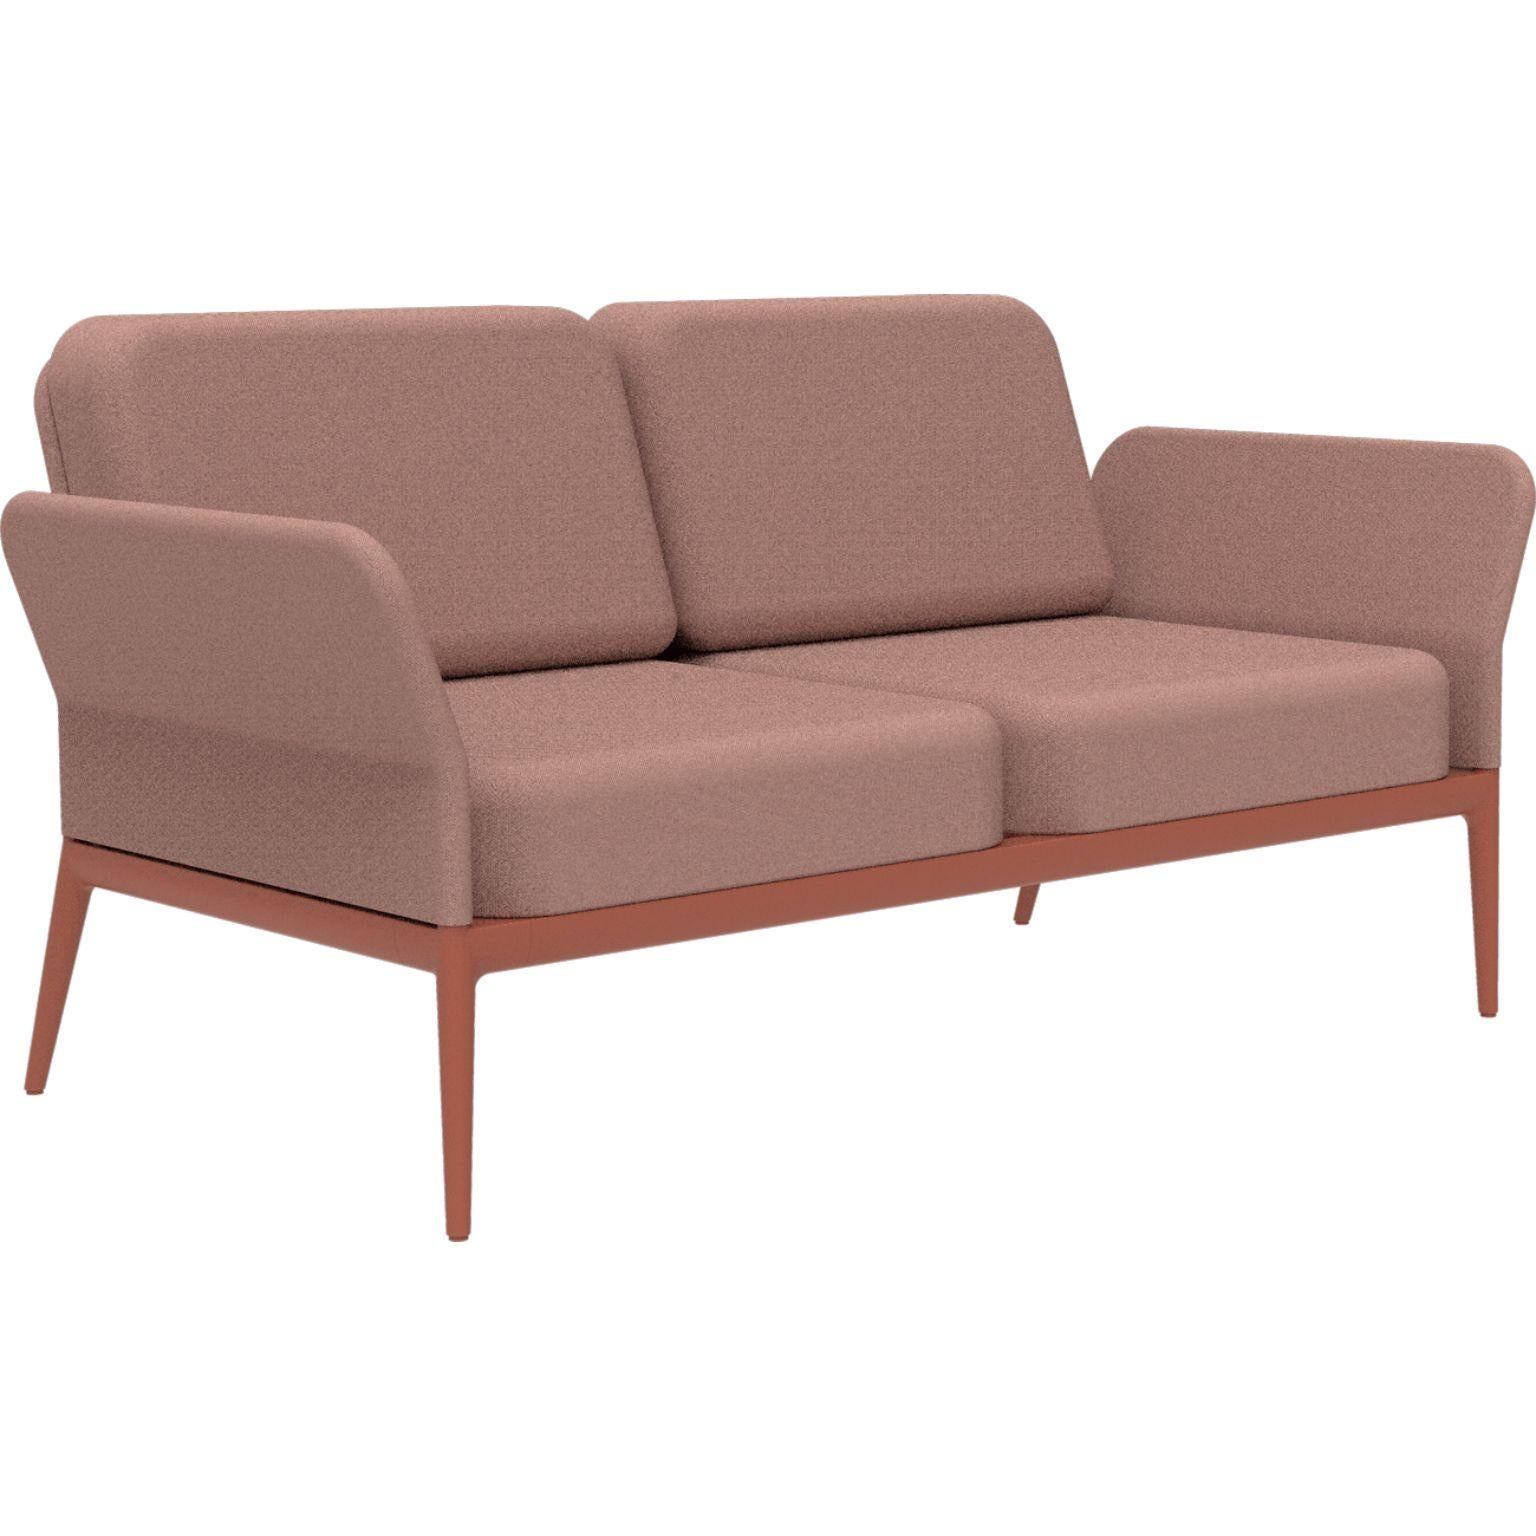 Cover Salmon Sofa by MOWEE.
Dimensions: D 83 x W 160 x H 81 cm (seat height 42 cm).
Material: Aluminum and upholstery.
Weight: 32 kg.
Also available in different colors and finishes.

An unmistakable collection for its beauty and robustness. A